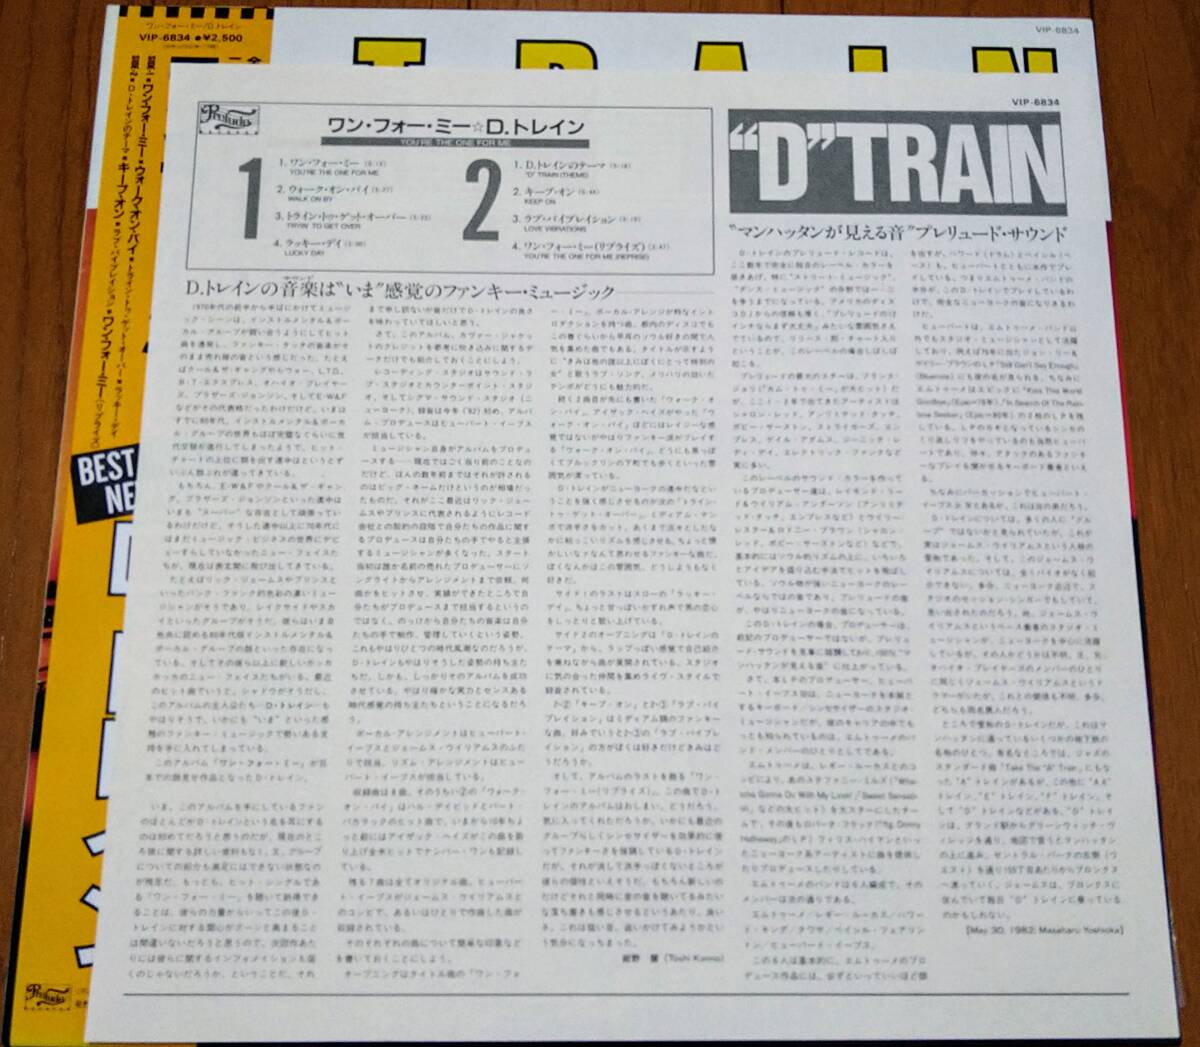 【LP Soul】D Train「You're The One For Me」JPN盤 Walk On By.Keep On 他 収録！_ライナー